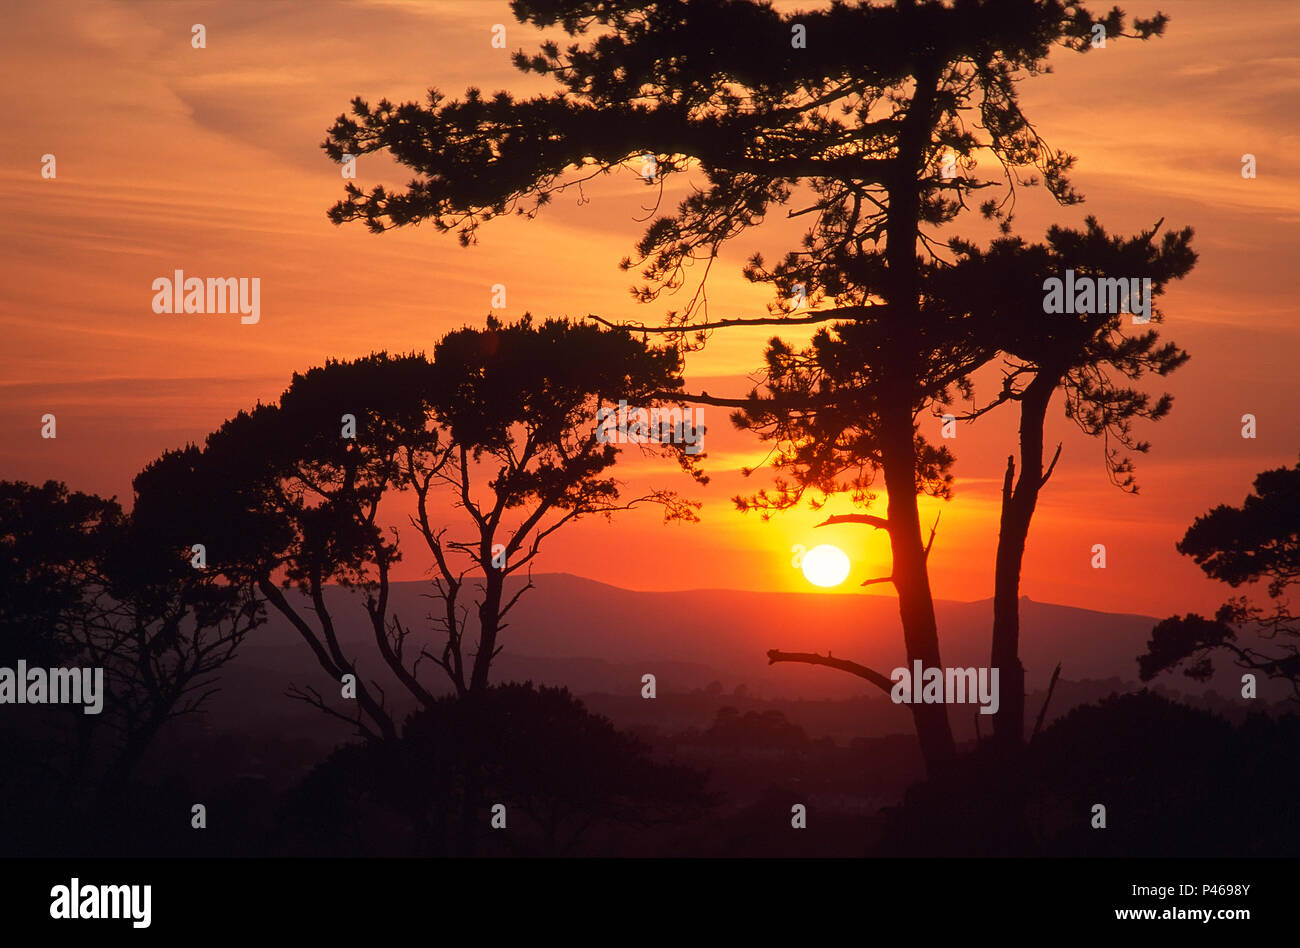 Pine trees silhouetted against a dramatic sunset on Dartmoor in Devonshire, England Stock Photo